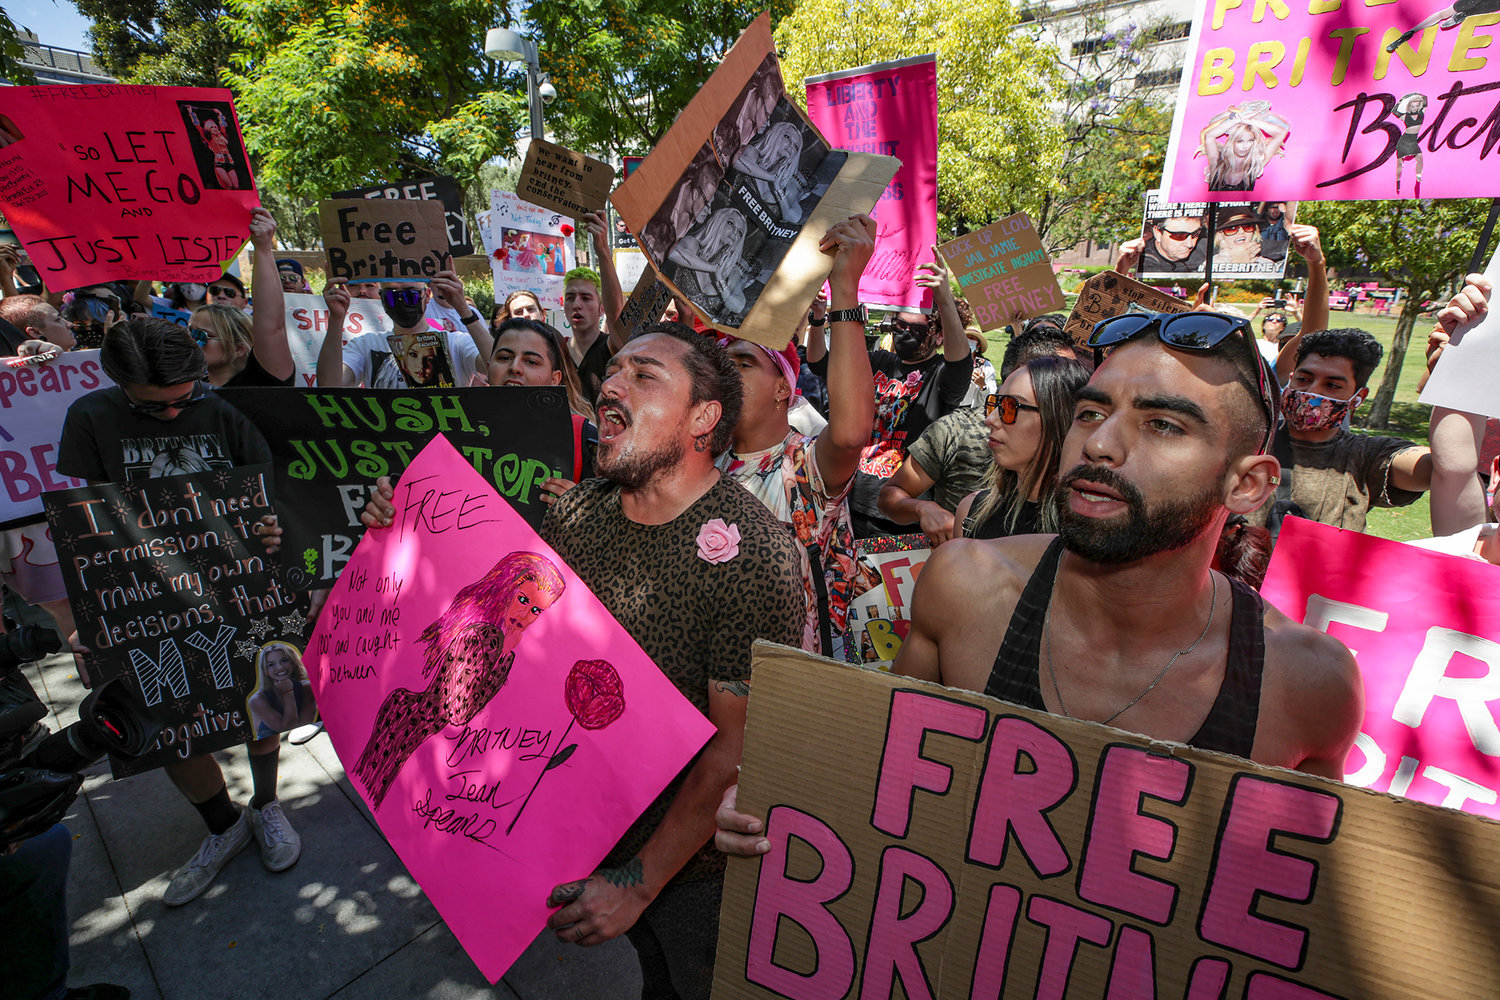 Supporters of Britney Spears rally as a hearing on the pop singer's conservatorship case takes place at Stanley Mosk Courthouse on June 23, 2021, in Los Angeles. (Irfan Khan/Los Angeles Times/TNS)